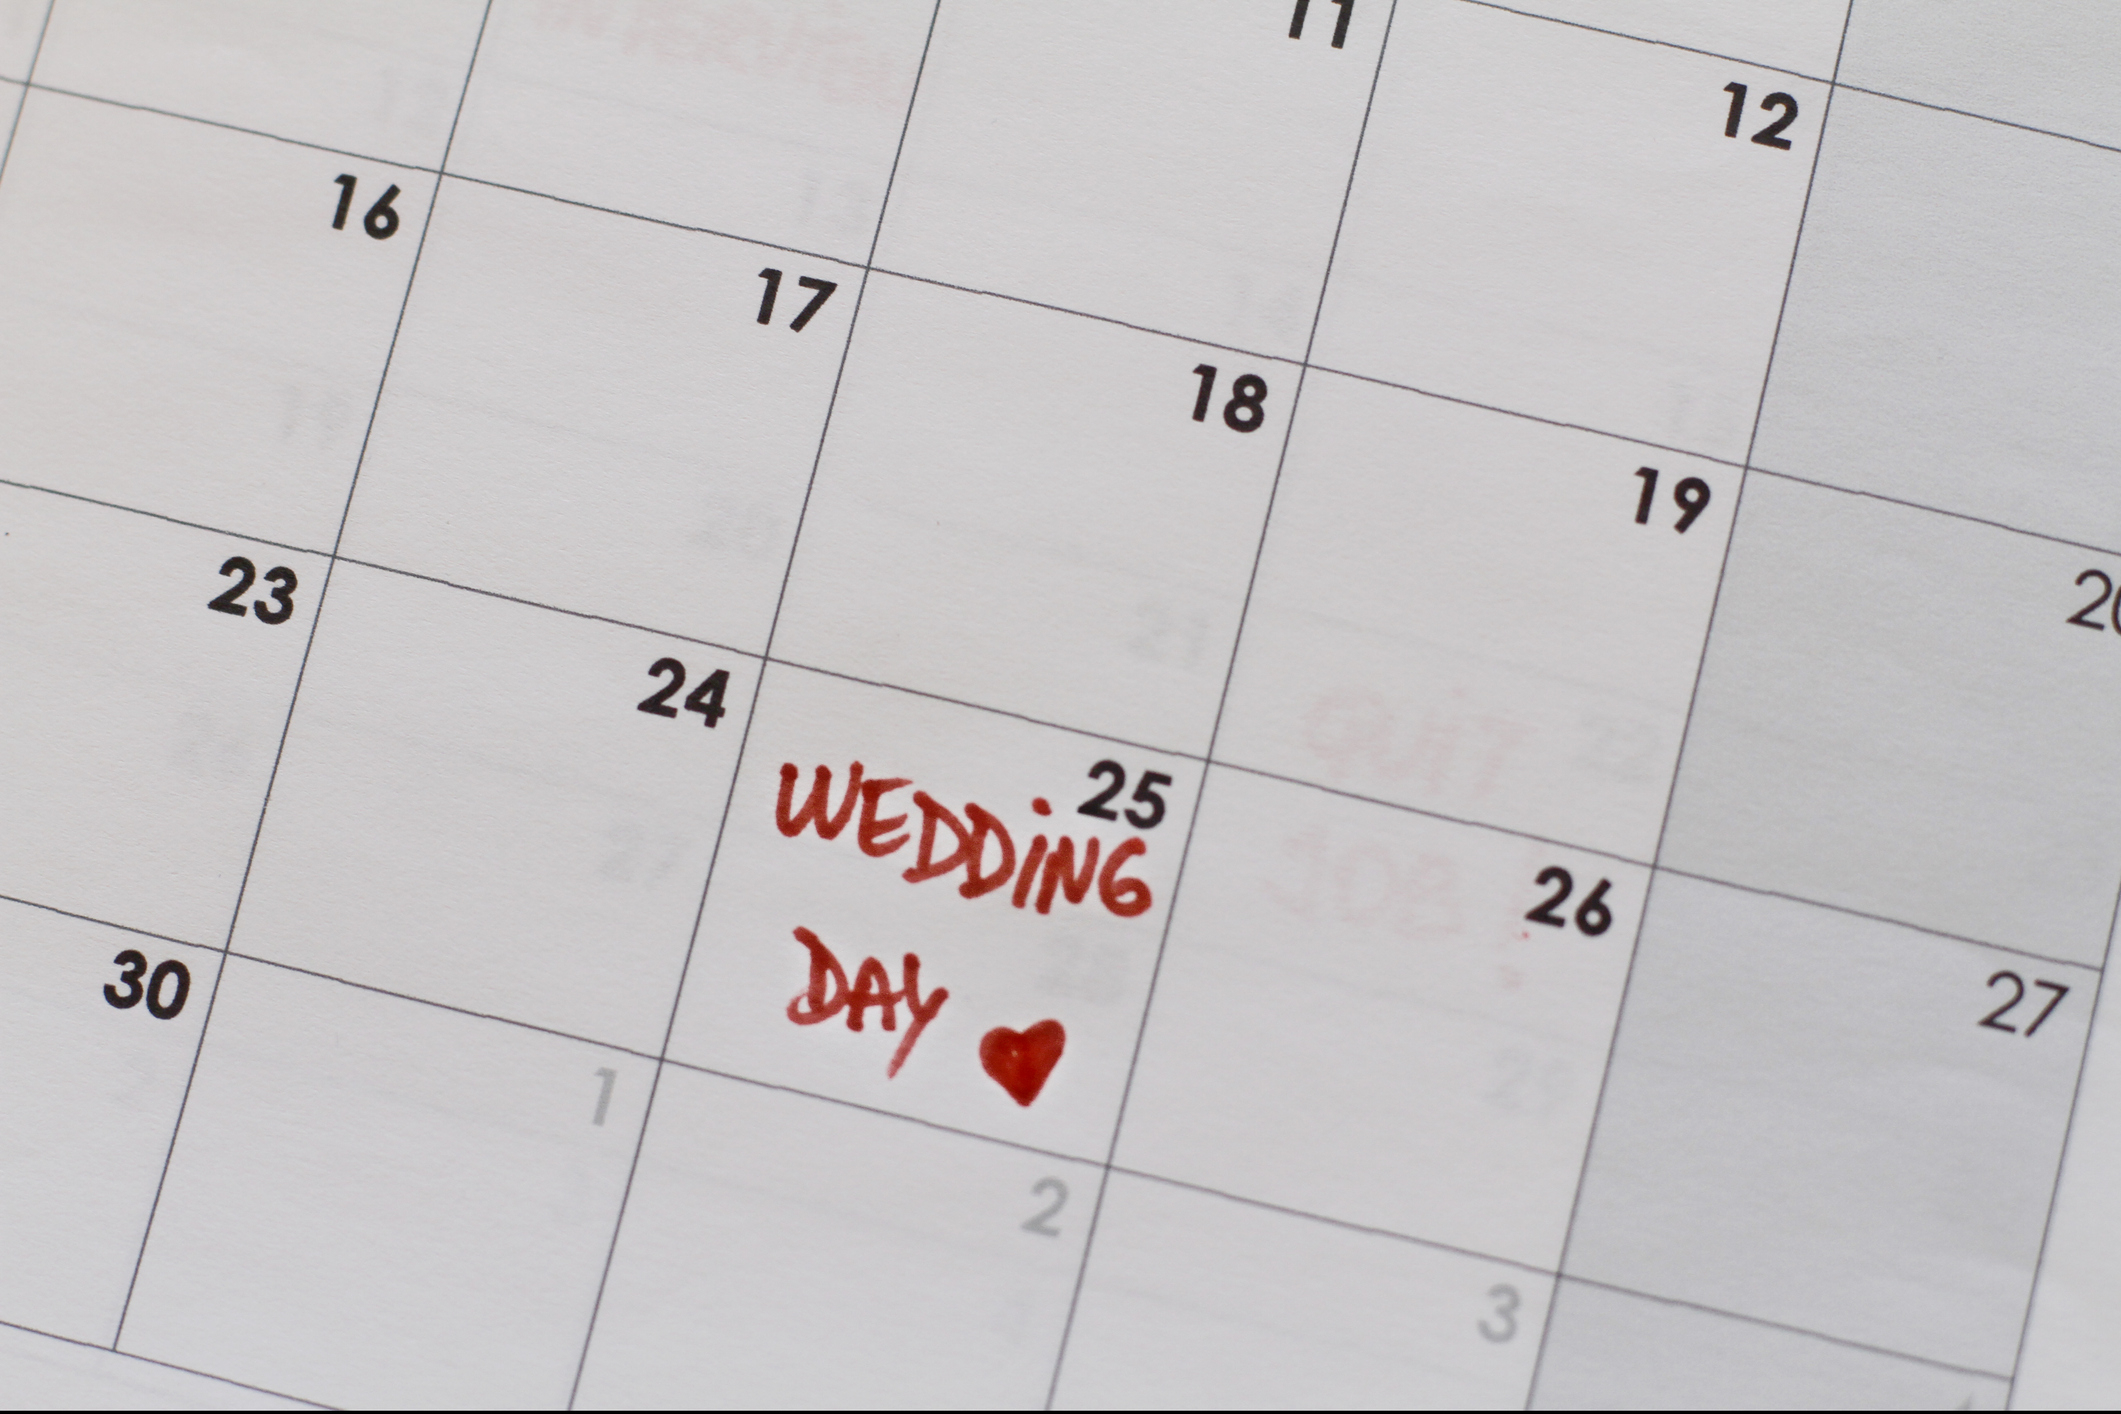 Calendar with the date marked as &quot;Wedding Day&quot; with a heart symbol for a reminder